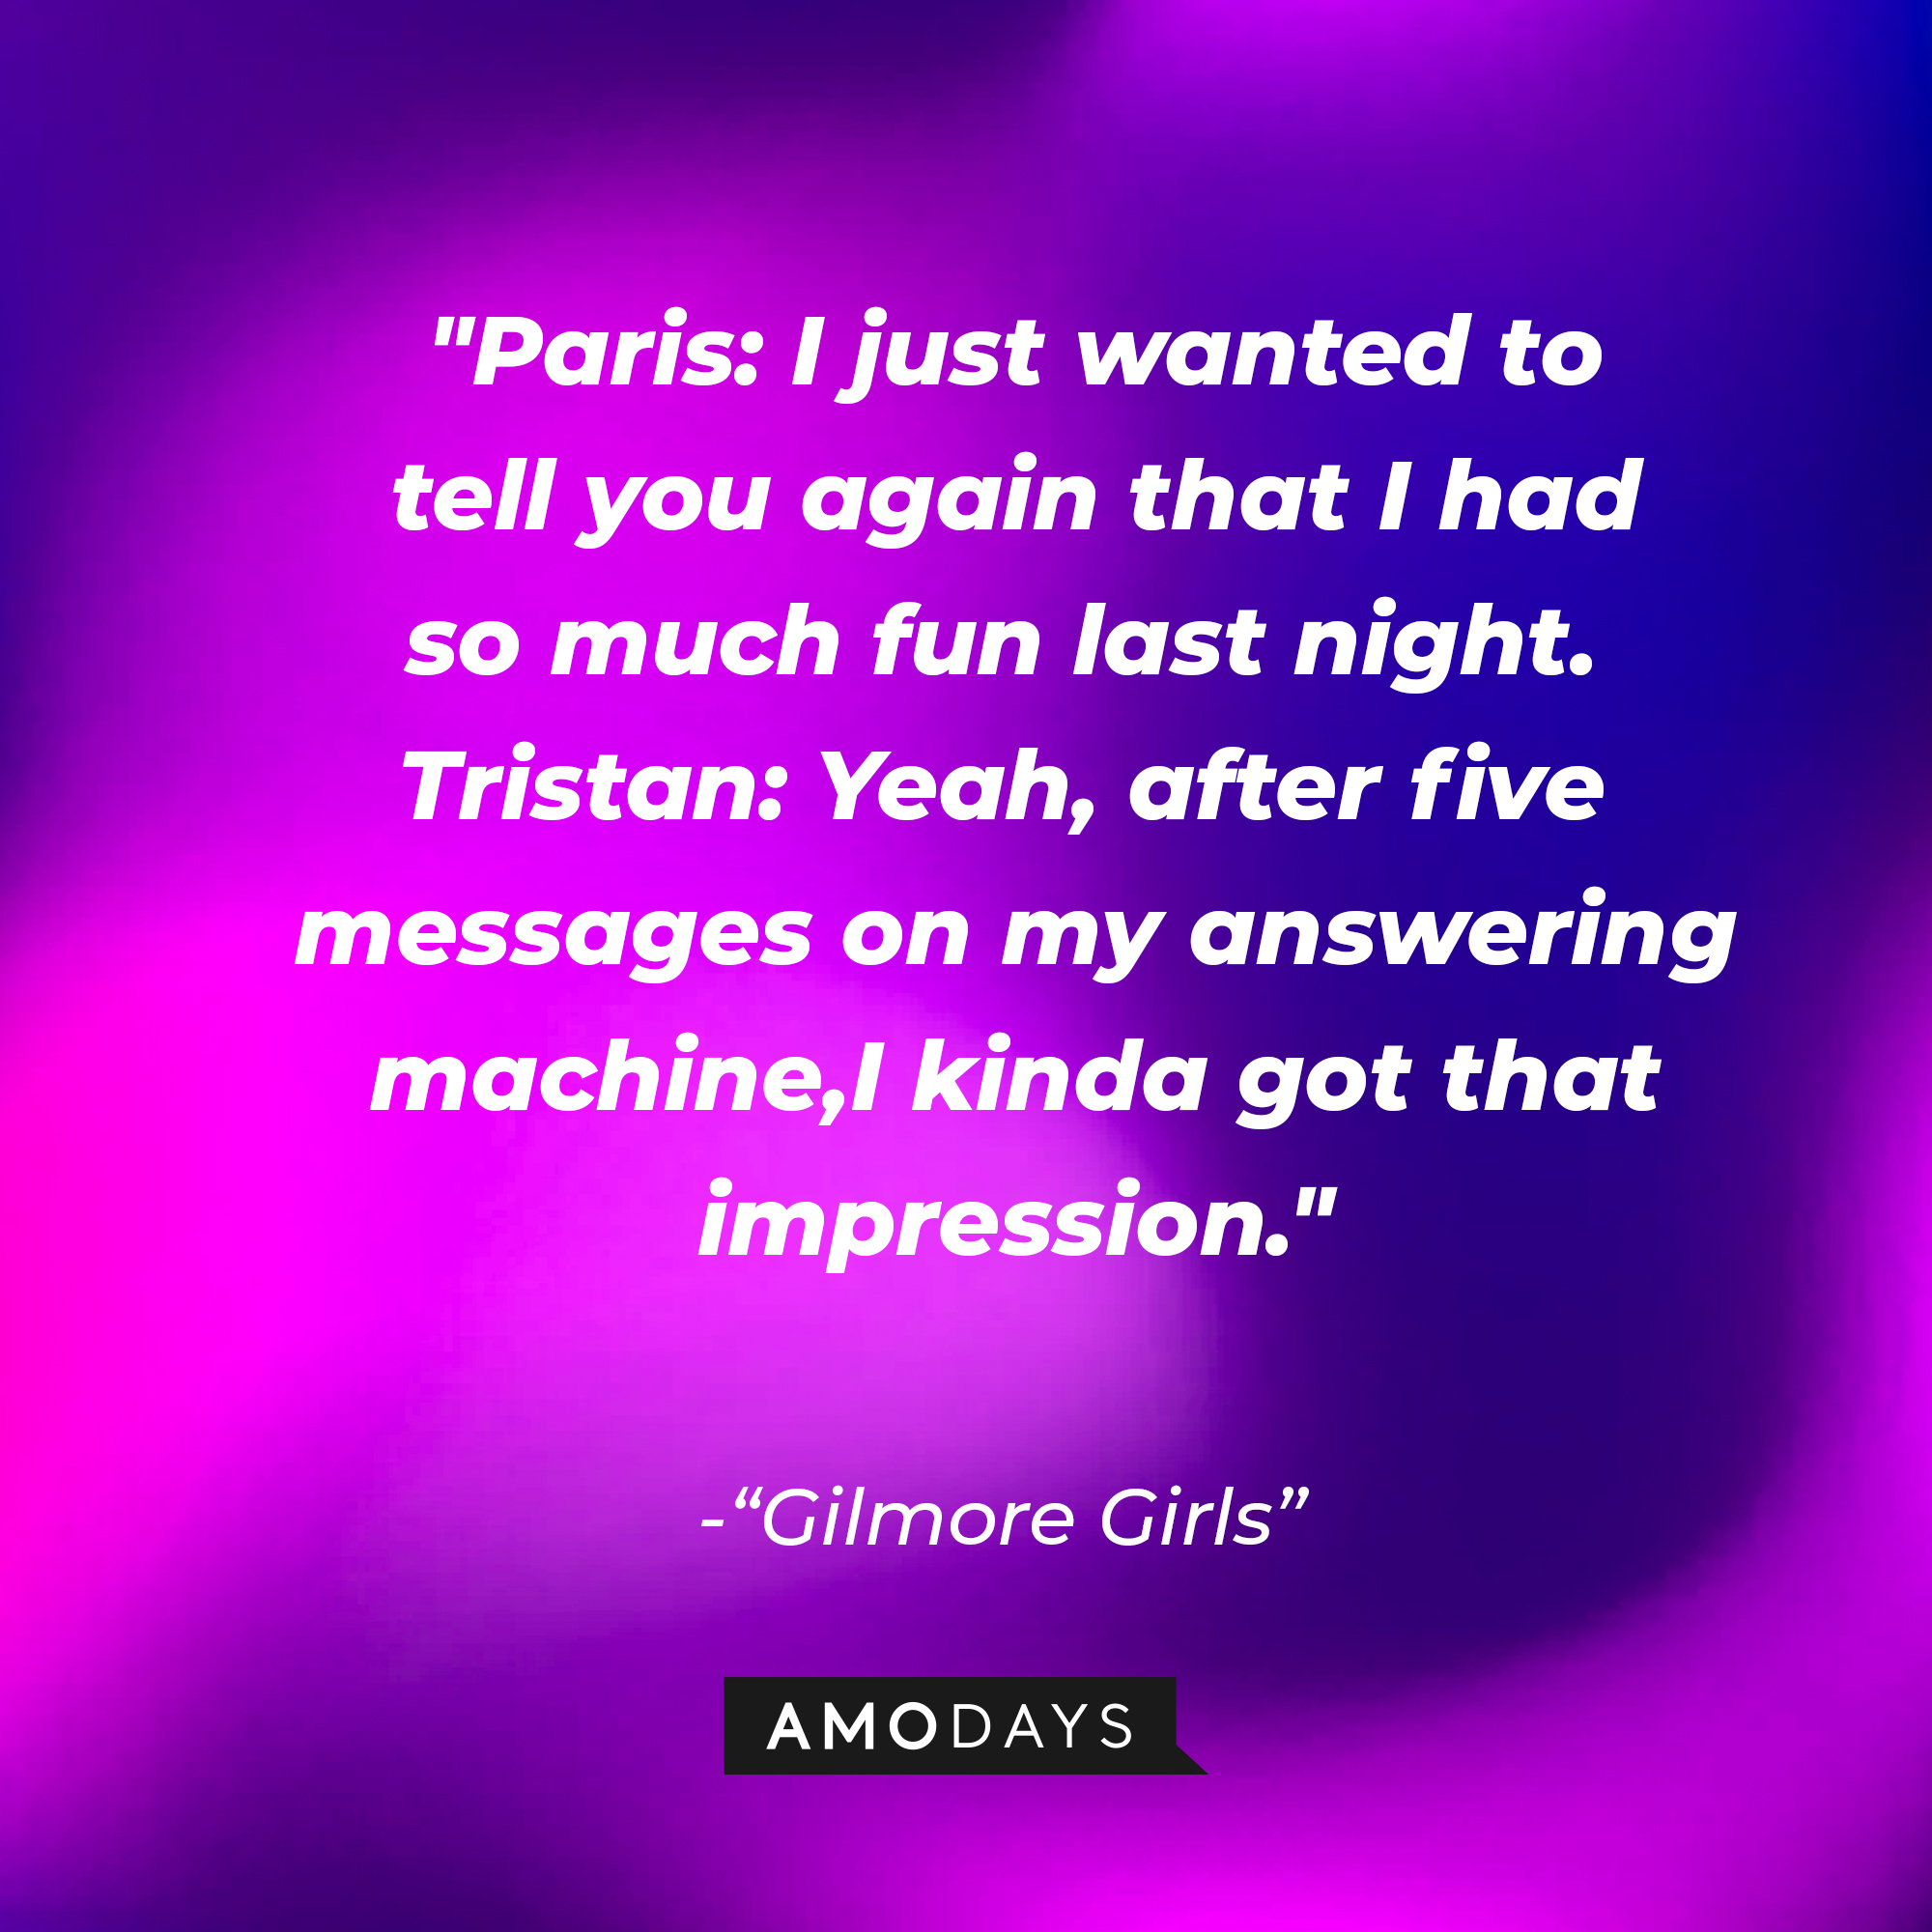 Quote from "Gilmore Girls": “Paris: I just wanted to tell you again that I had so much fun last night. Tristan: Yeah, after five messages on my answering machine, I kinda got that impression.” | Source: AmoDays